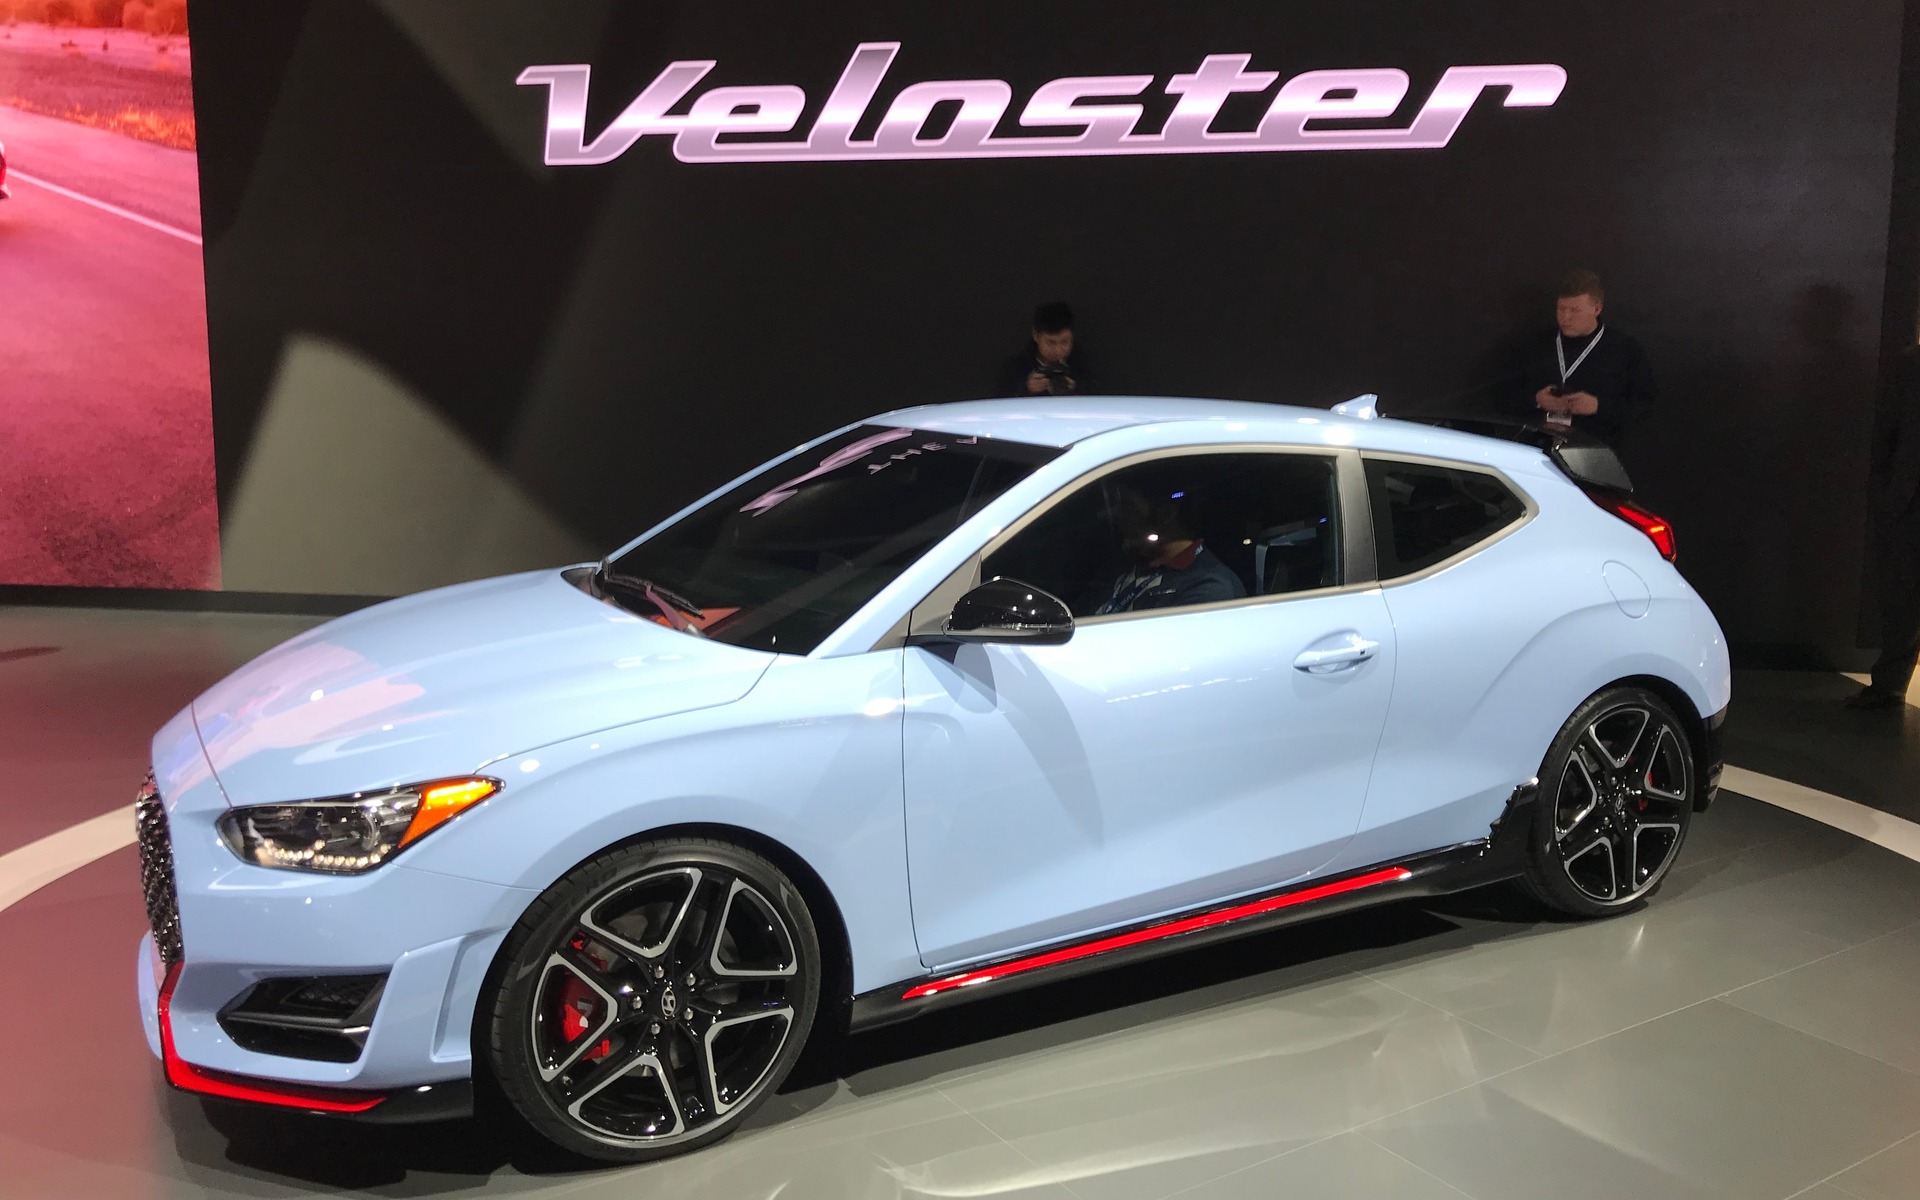 2019 Hyundai Veloster News Reviews Picture Galleries And